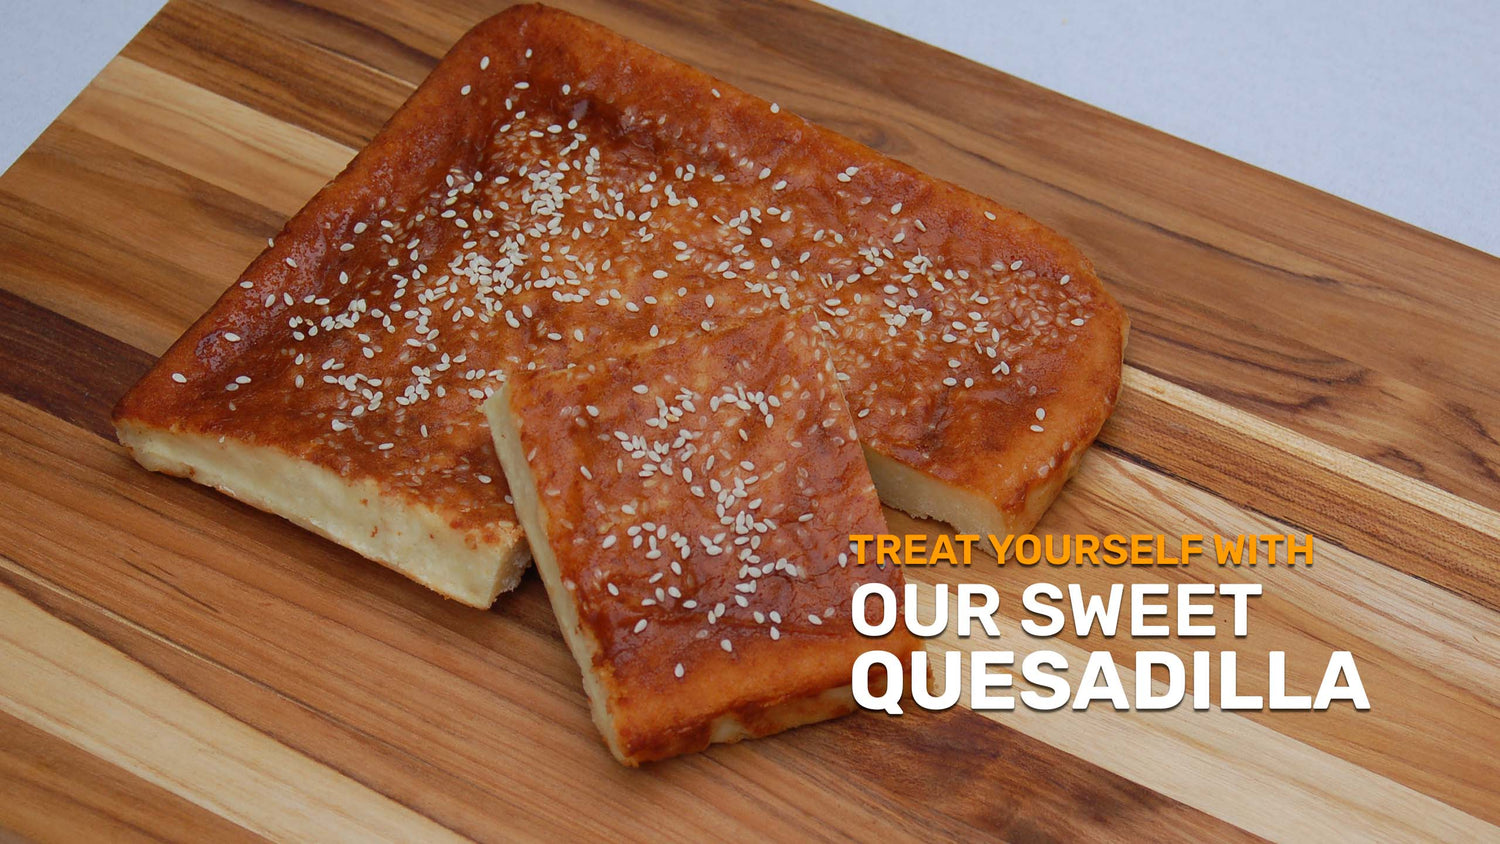 Xinca Foods, treat yourself with our sweet quesadilla.